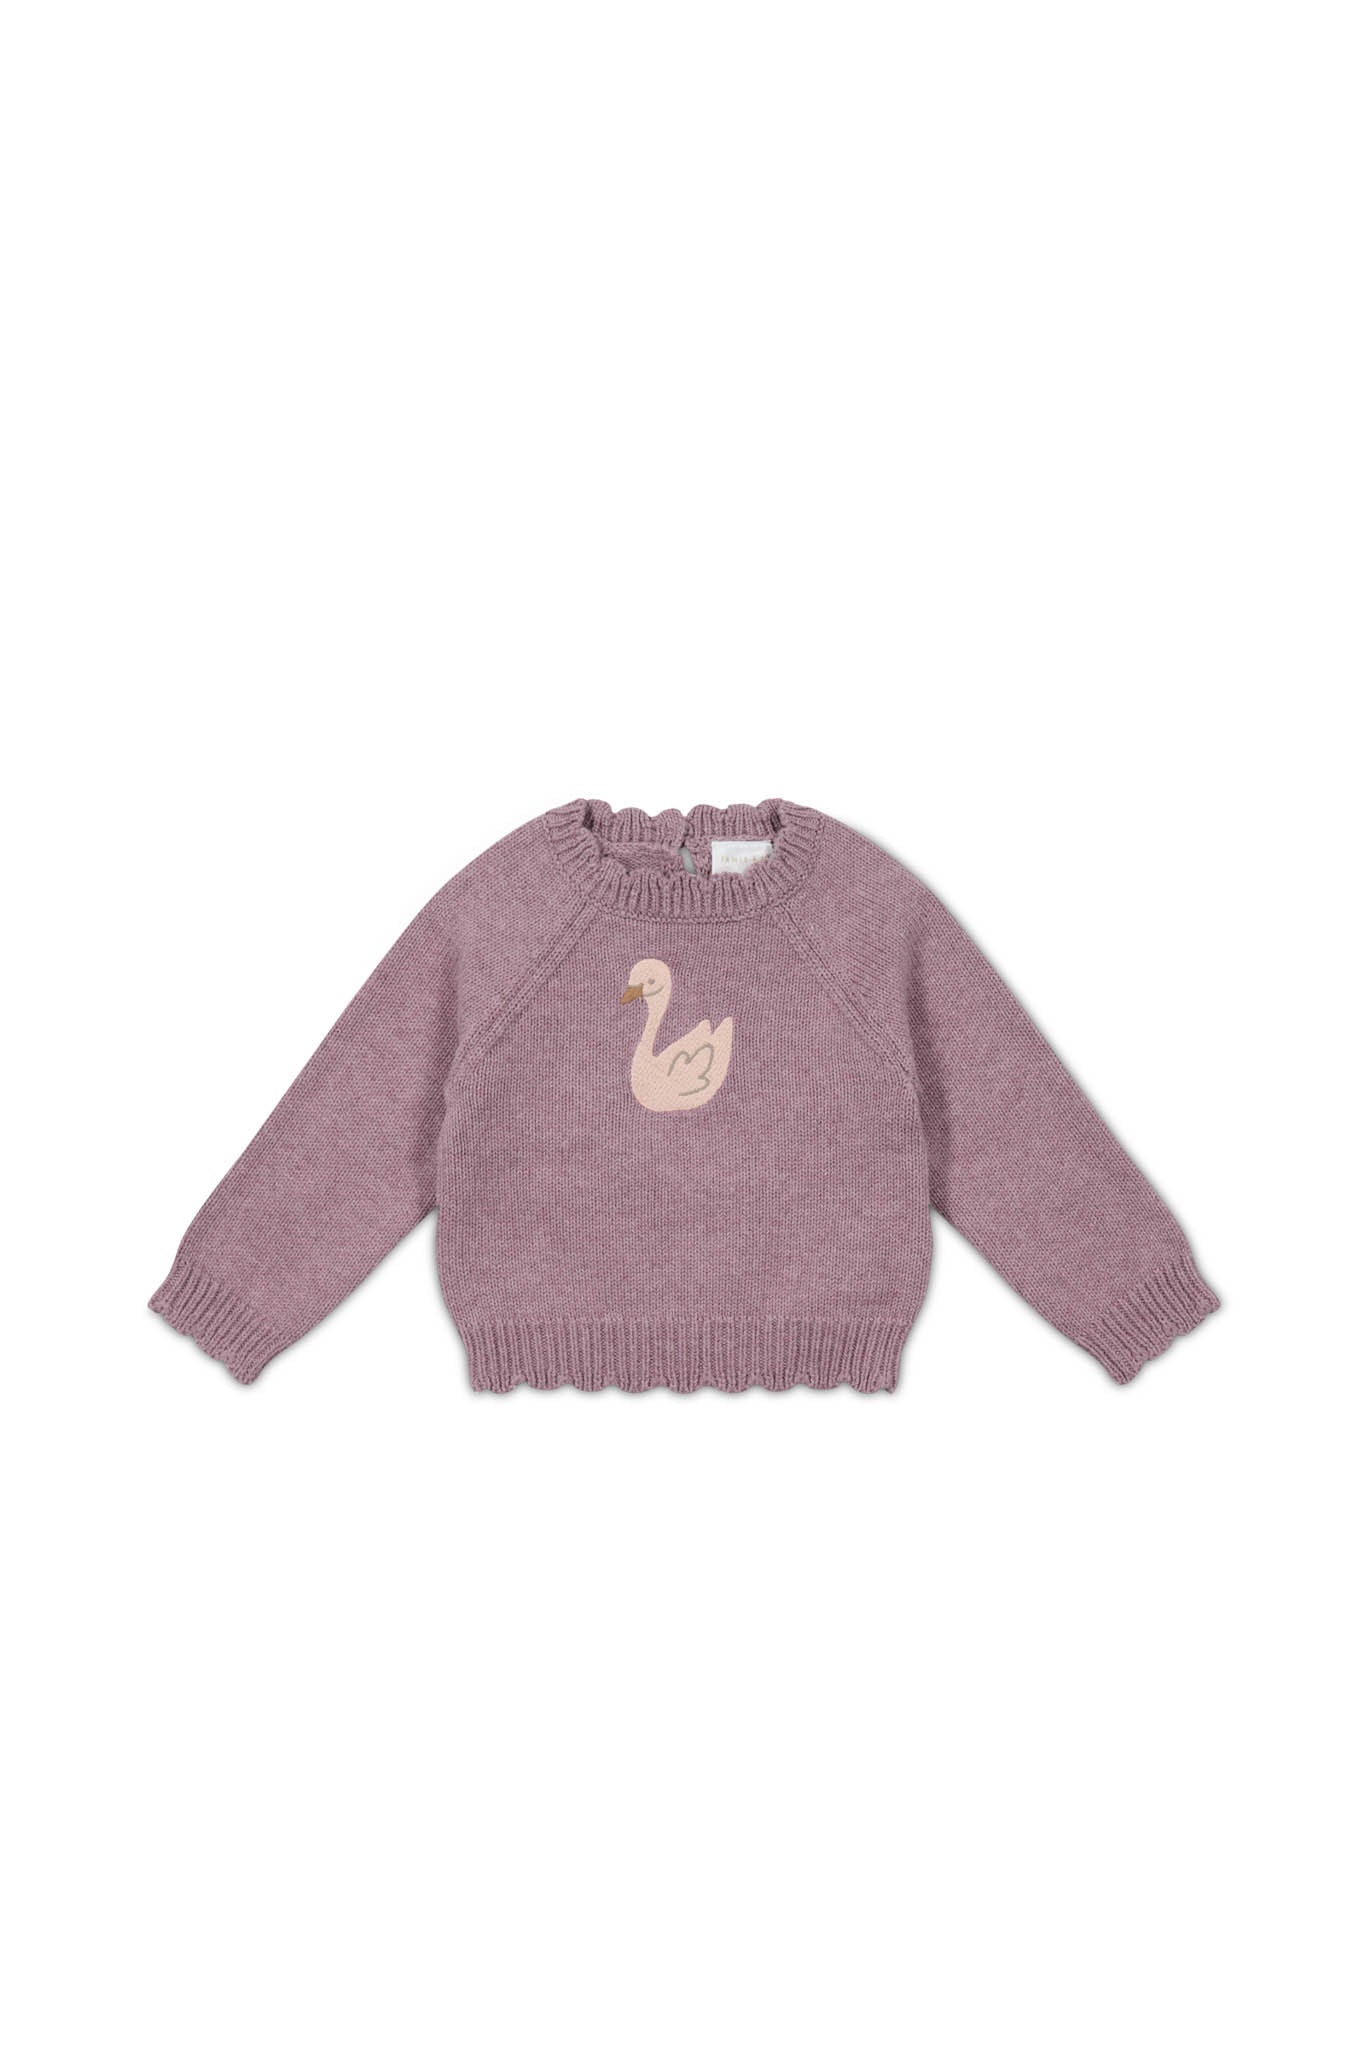 Audrey Knitted Jumper - Dreamy Pink Marle